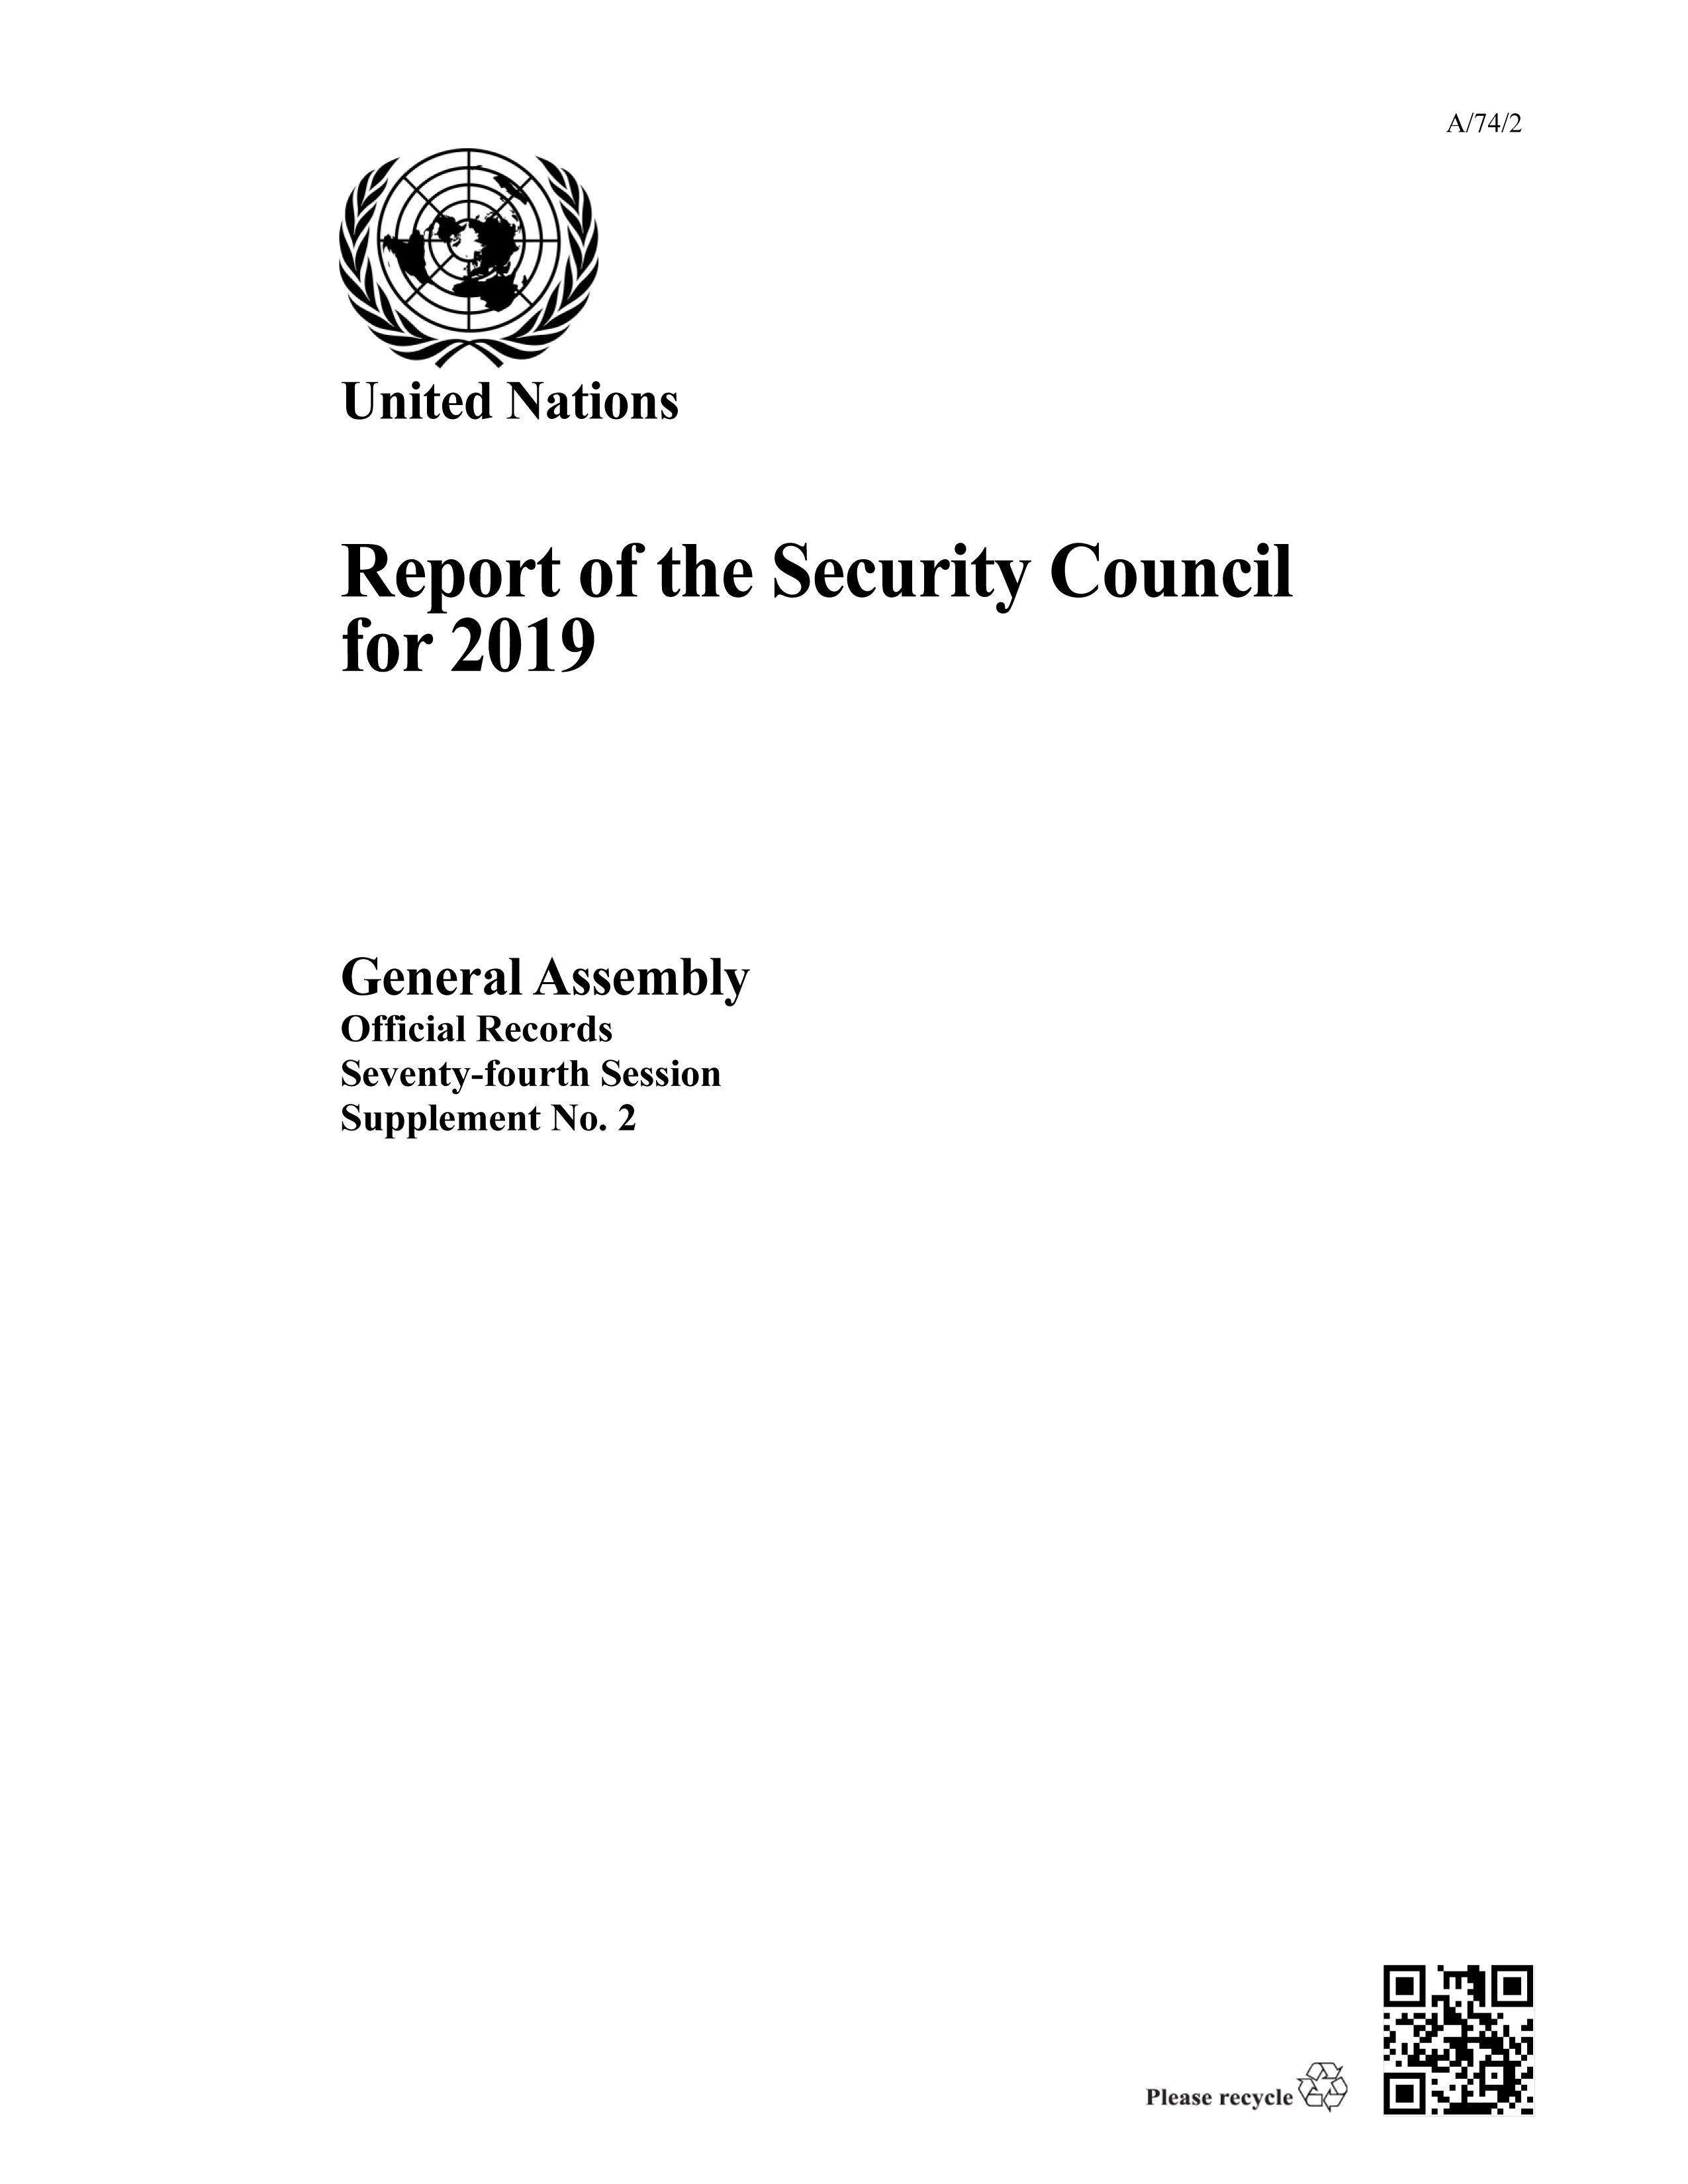 image of Report of the Security Council for 2019